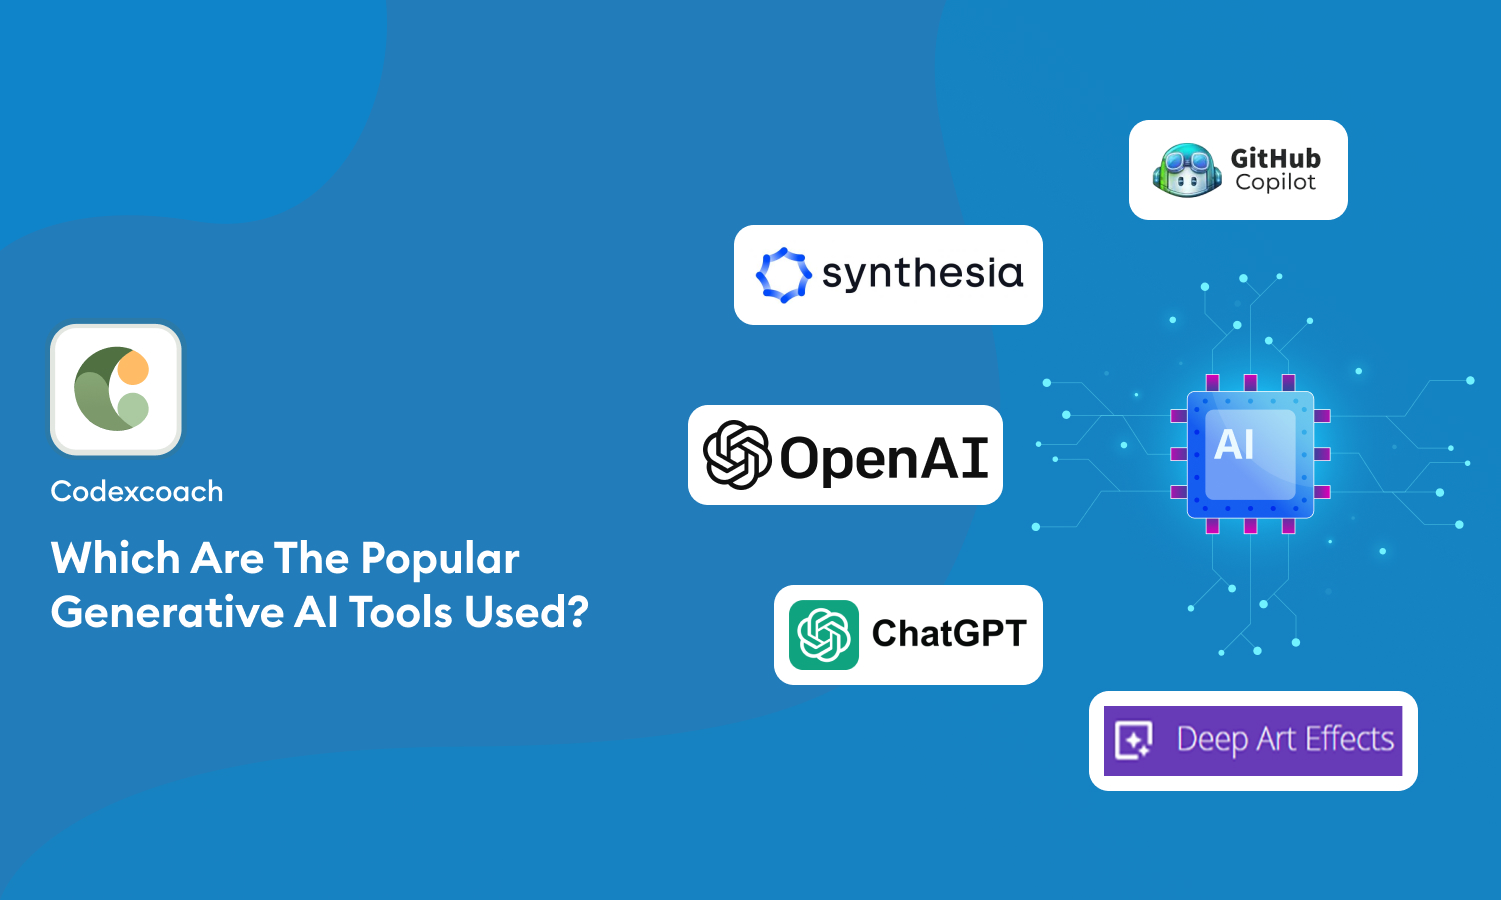 Which Are The Popular Generative AI Tools Used?